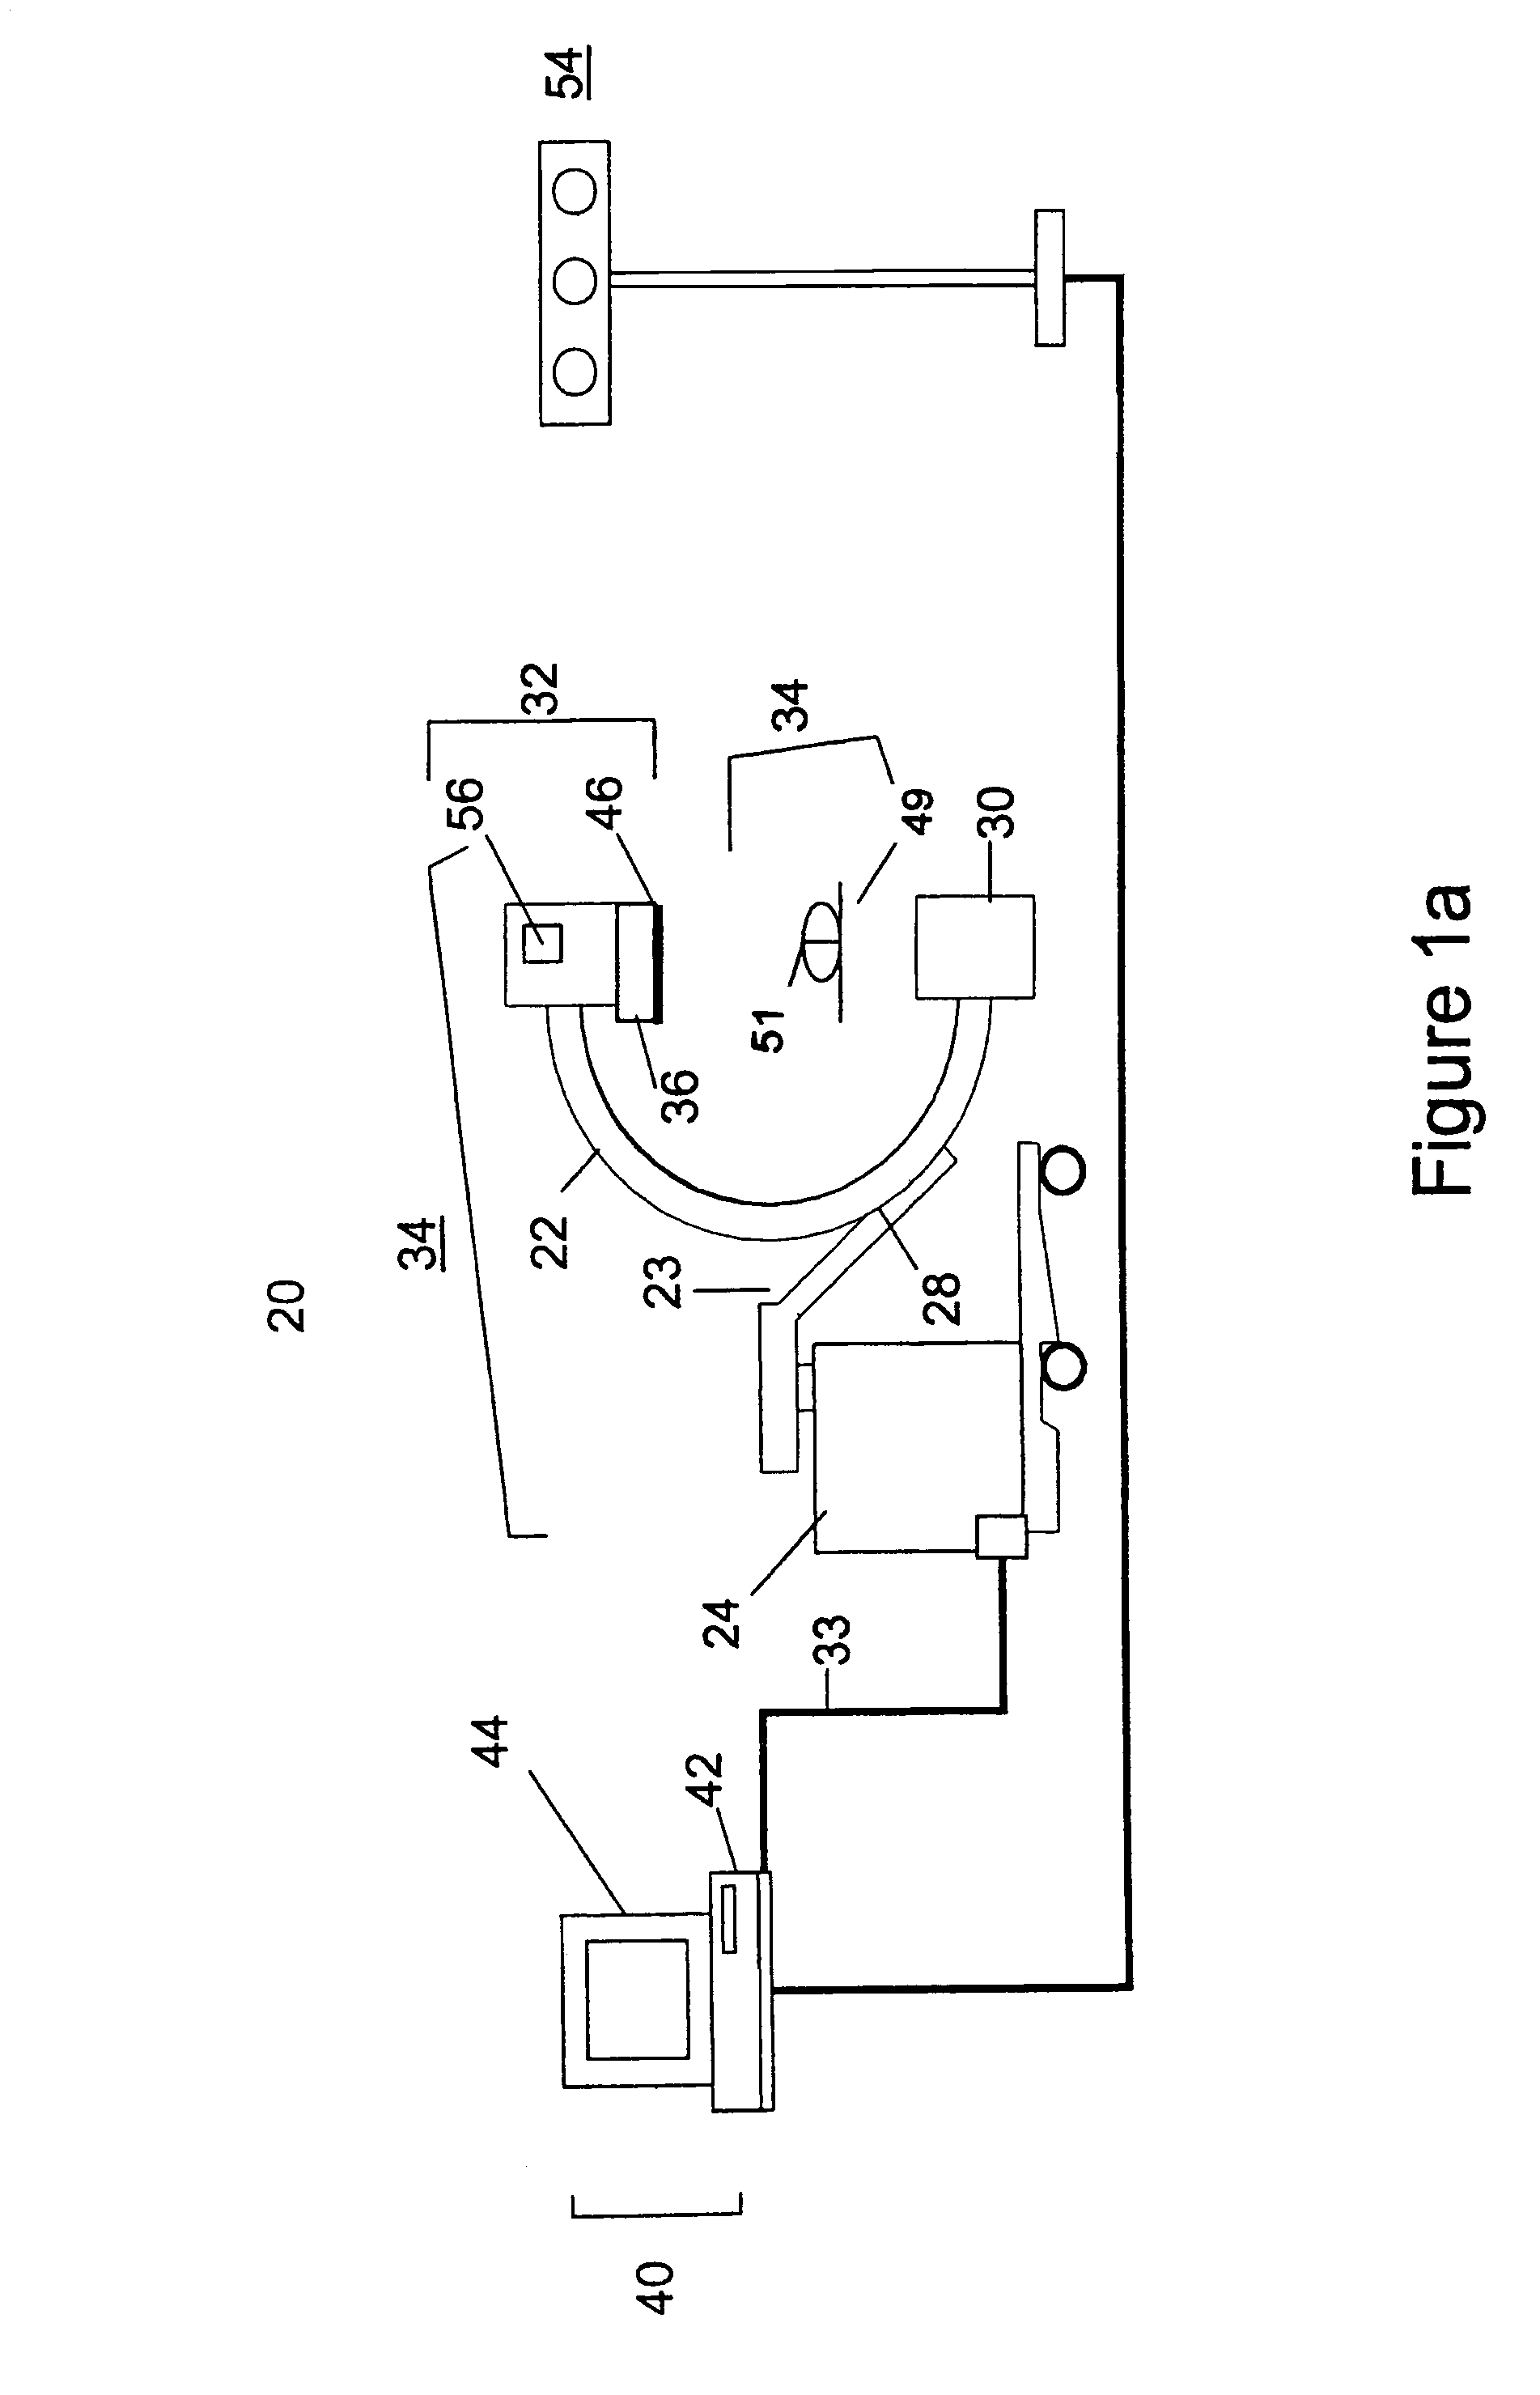 Apparatus, system and method of calibrating medical imaging systems